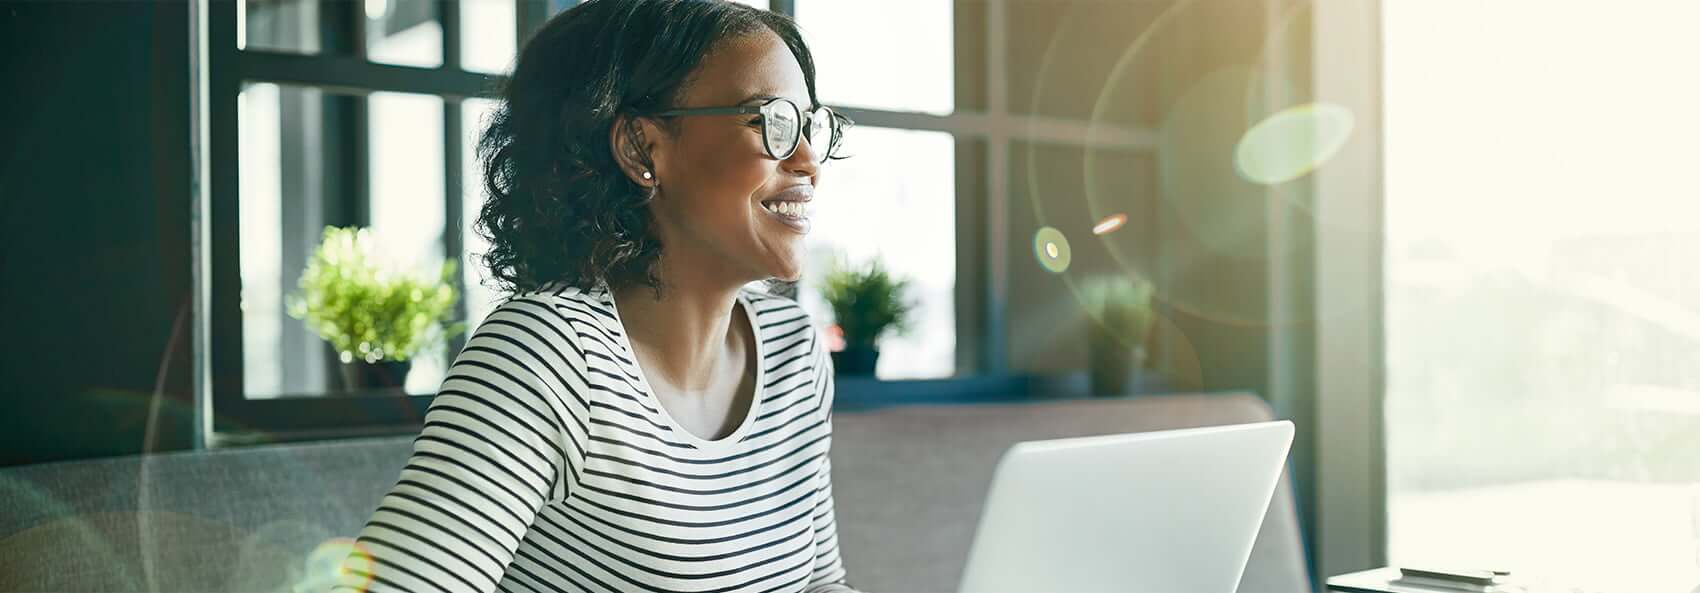 woman with glasses smiling while working on computer